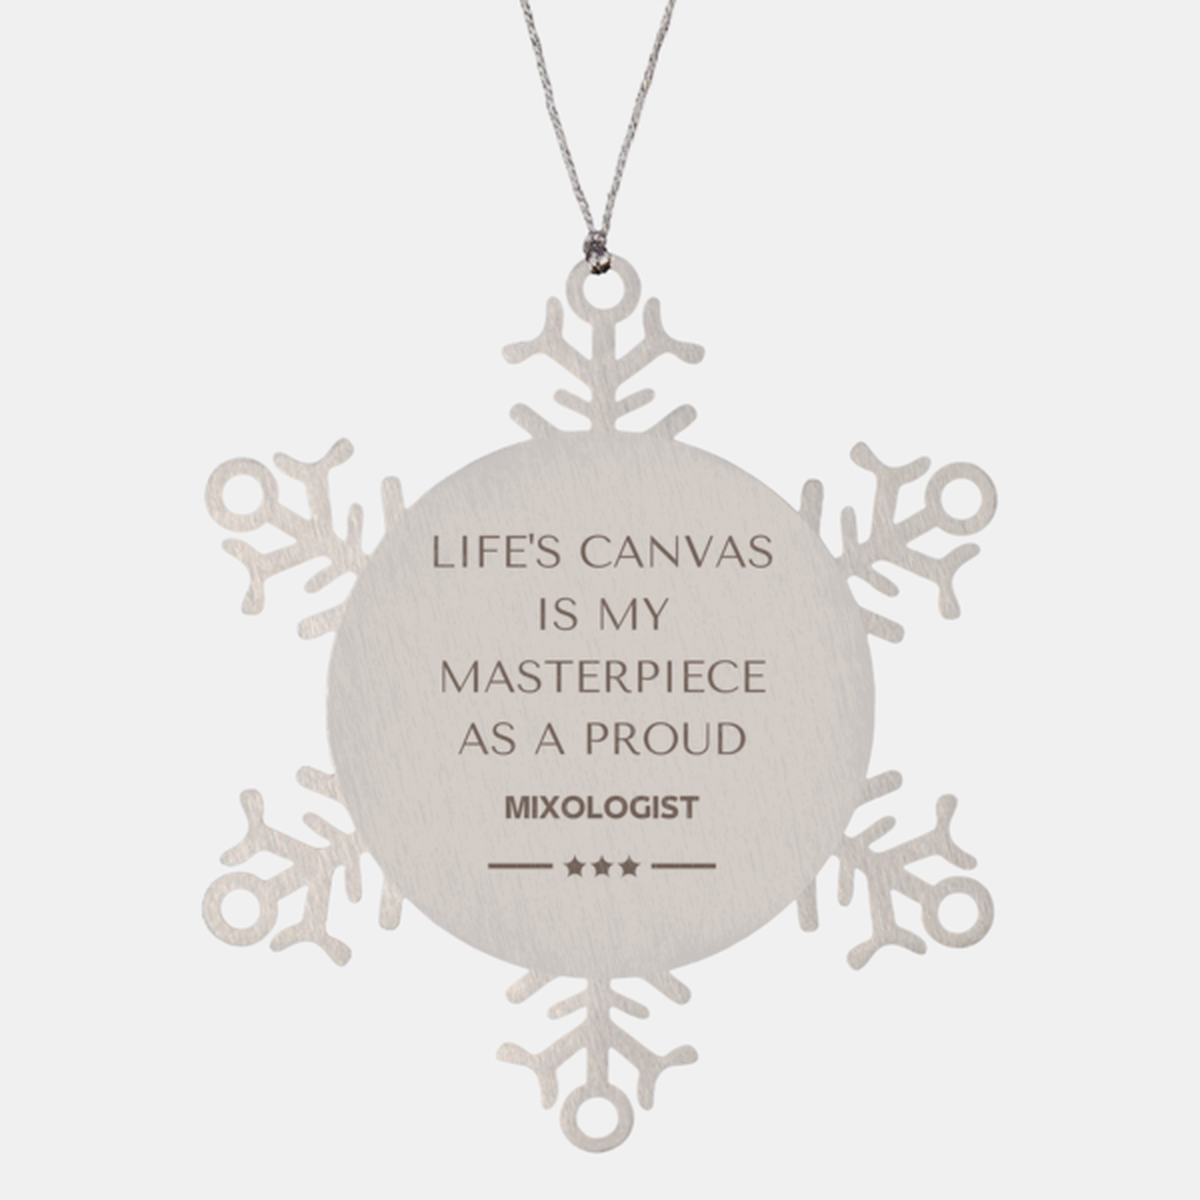 Proud Mixologist Gifts, Life's canvas is my masterpiece, Epic Birthday Christmas Unique Snowflake Ornament For Mixologist, Coworkers, Men, Women, Friends